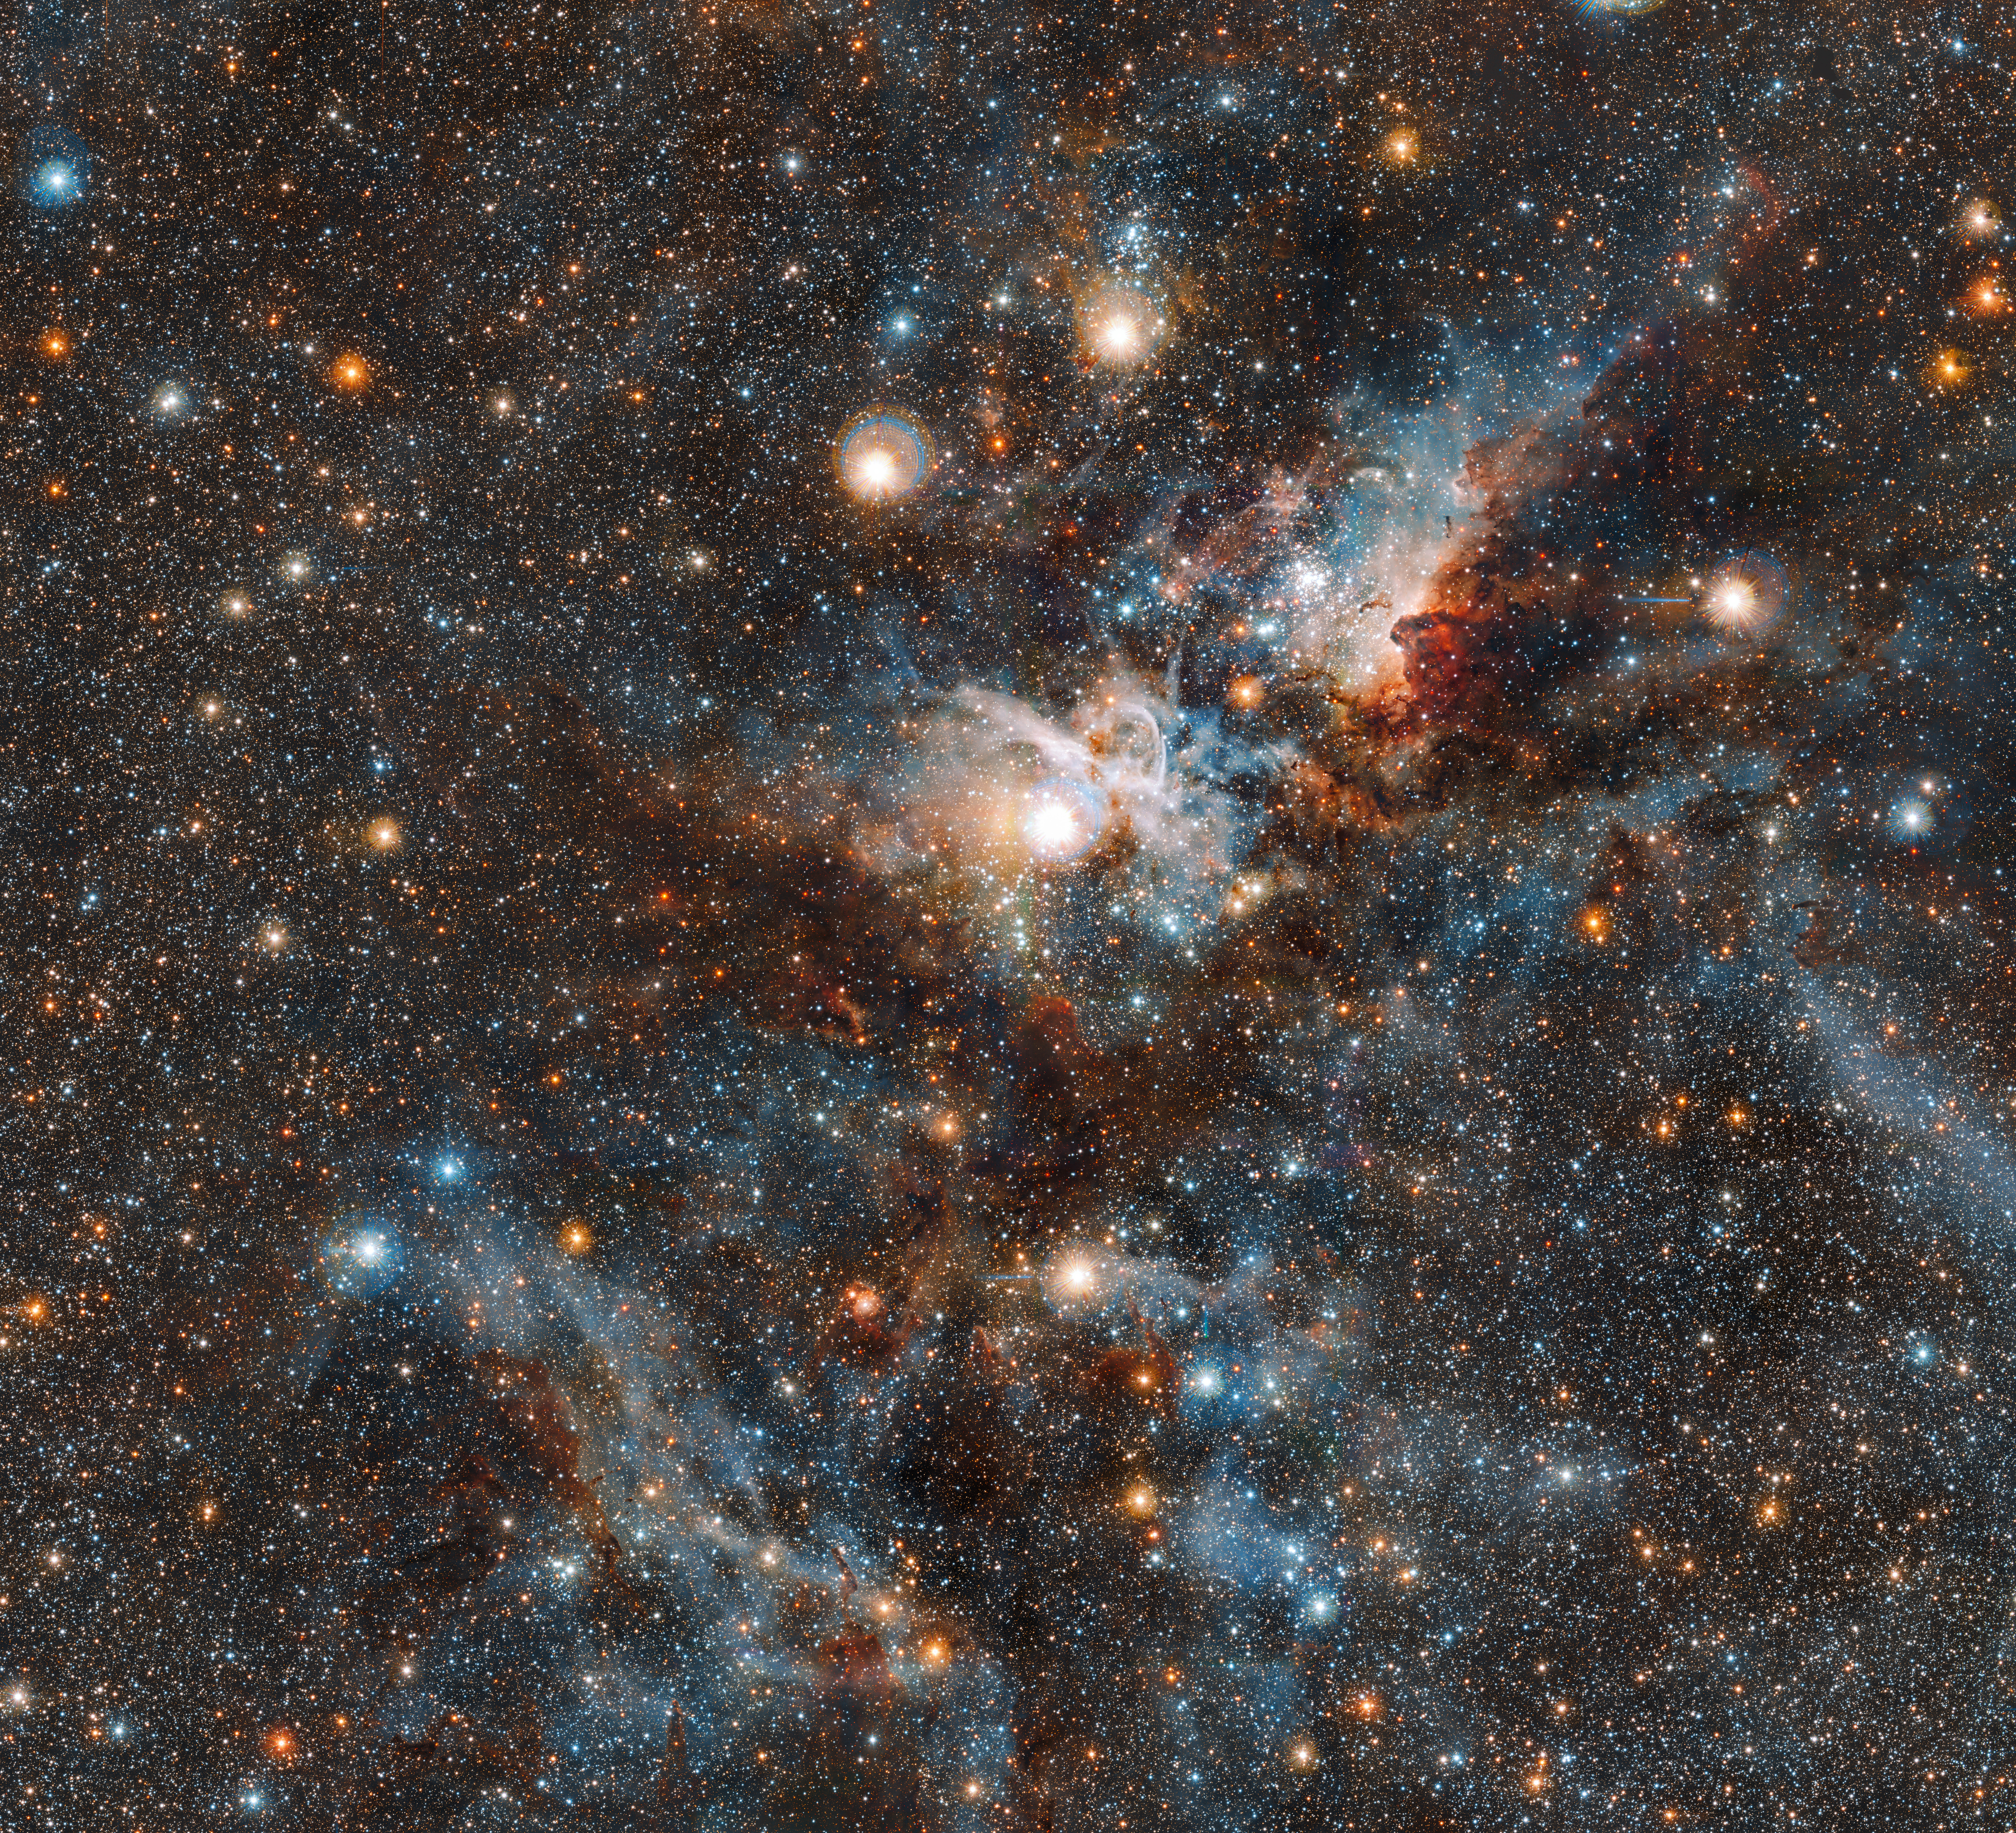 The Carina Nebula in Infrared light by ESO